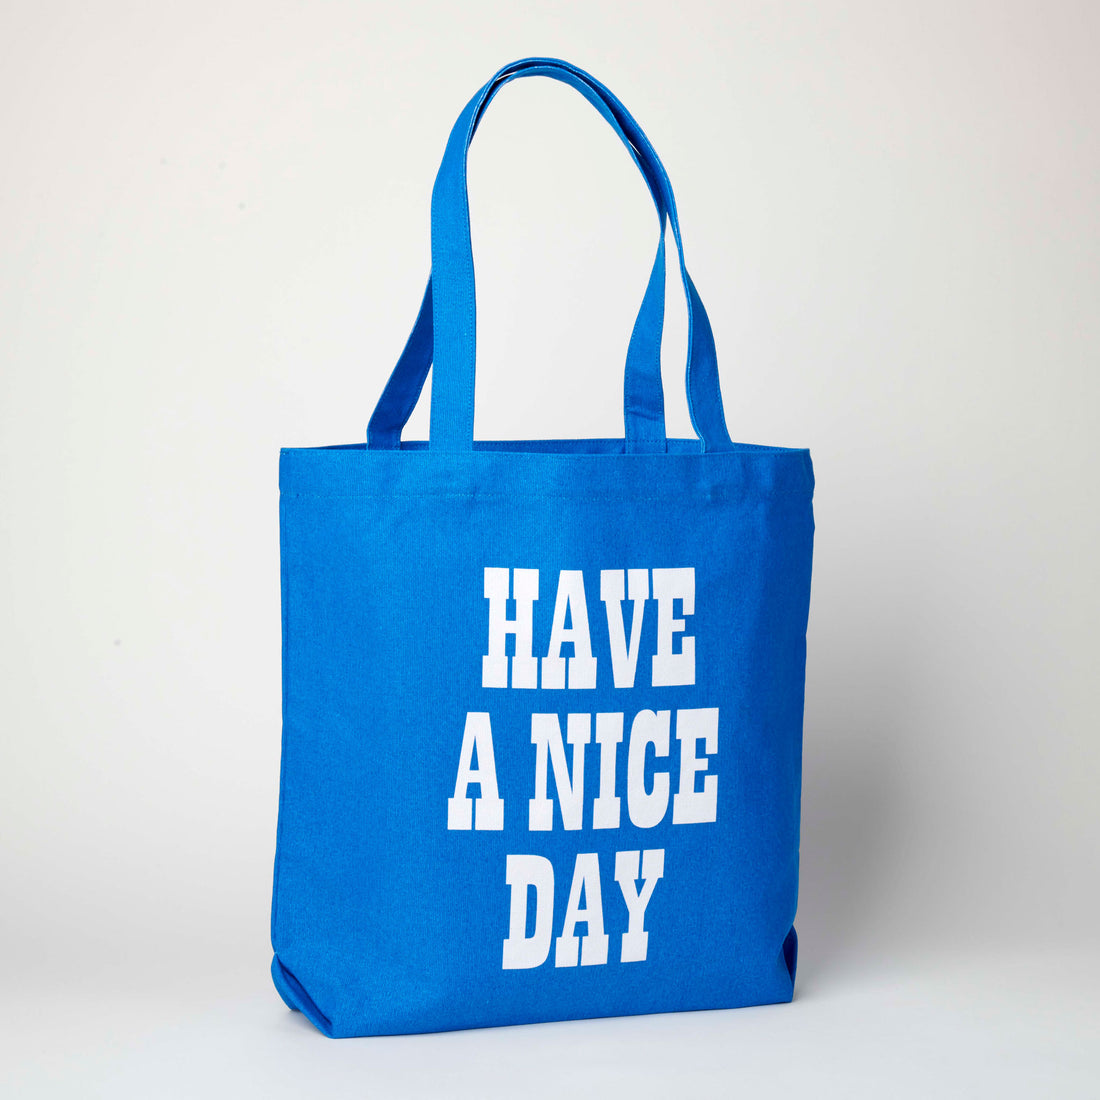 Peanuts tote - Have a Nice Day